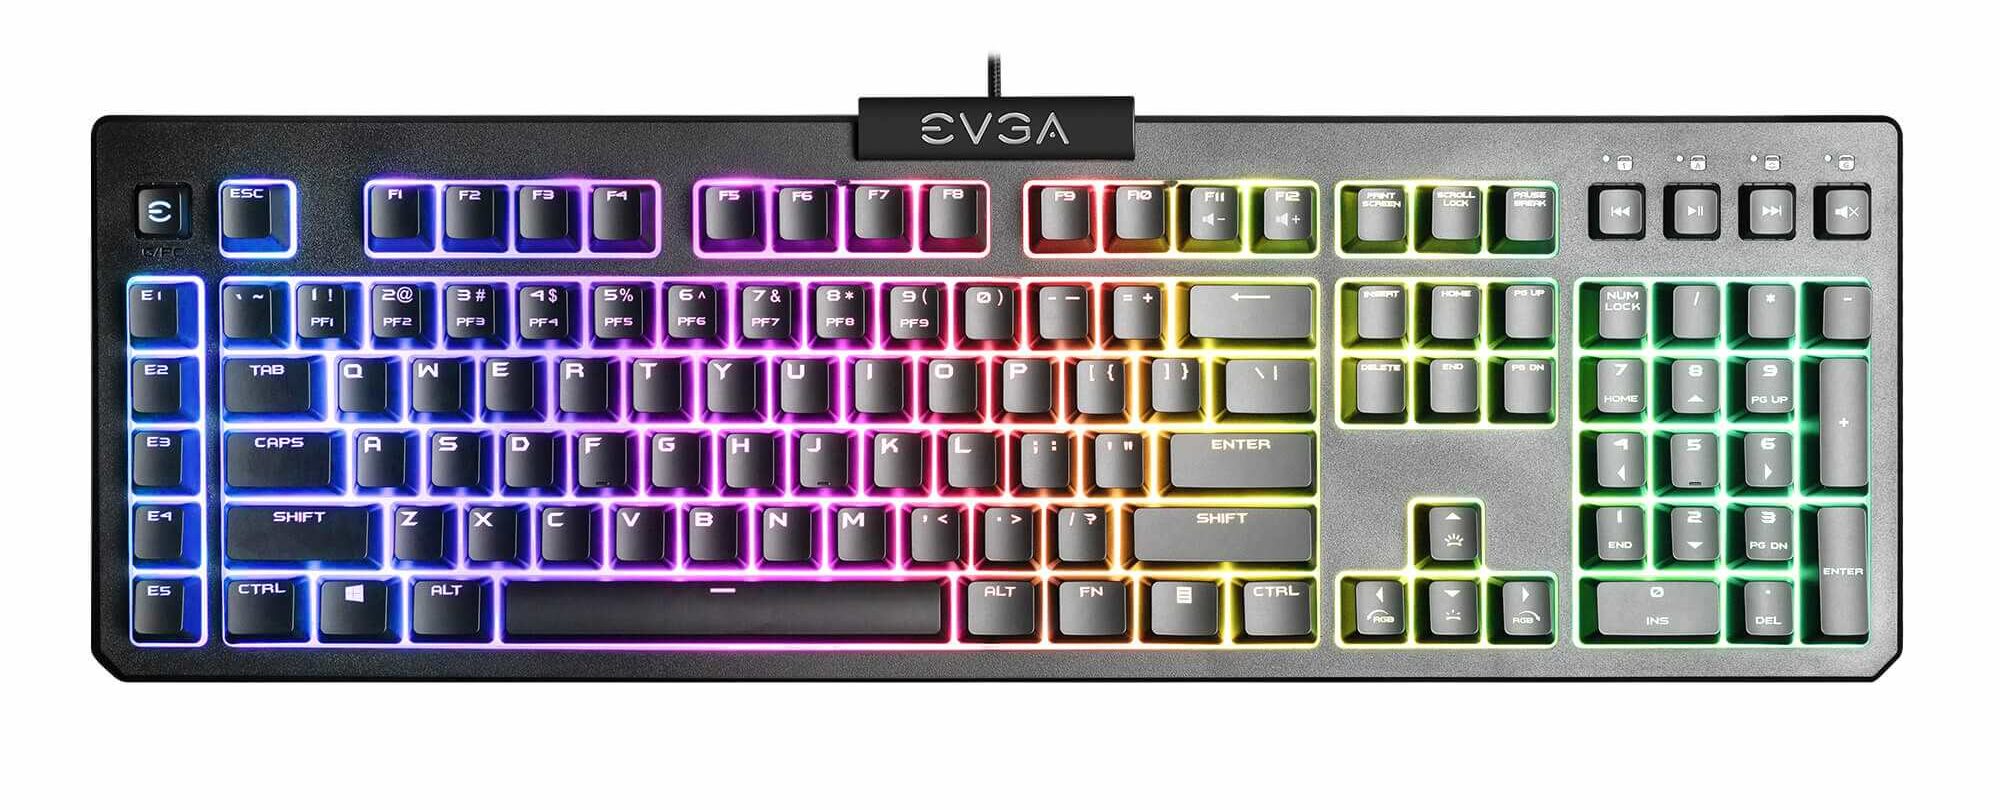 The EVGA Z12 Gaming Keyboard Review – A Great Affordable Alternative